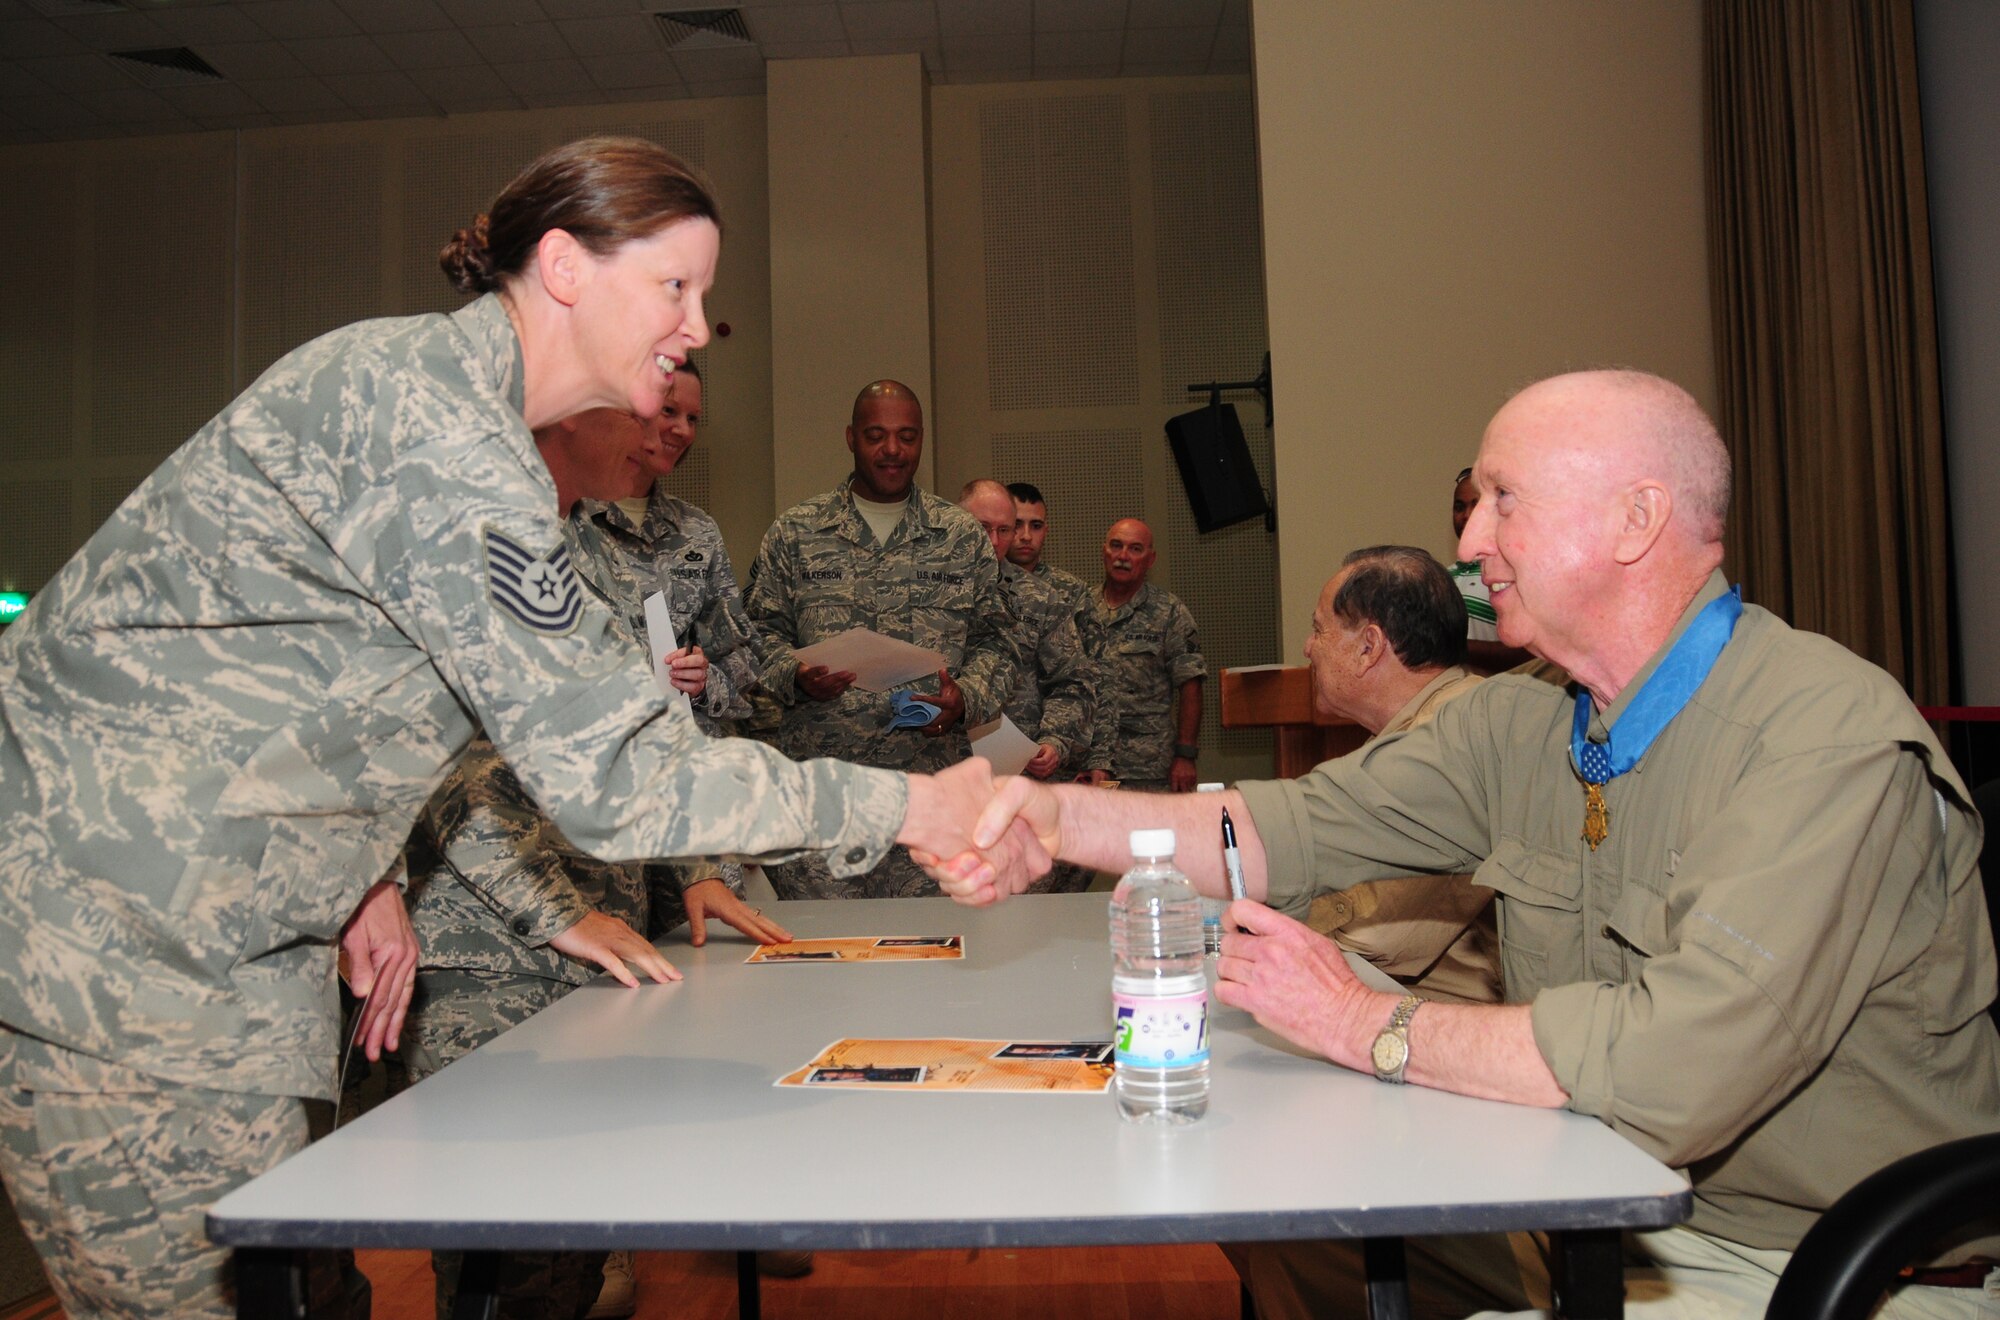 U.S. Air Force Tech. Sgt. Gina Porter, 386th Expeditionary Civil Engineer Squadron, shakes hands with Medal of Honor recipient Don Jenkins April 10, 2010 at an air base in Southwest Asia. Mr. Jenkins and fellow Medal of Honor recipient Retired Lt. Col. Alfred Rascon shared their Vietnam experiences and words of wisdom with Airmen as part of a tour through the U.S. Central Command area of responsibility. (U.S. Air Force photo by Staff Sgt. Lakisha A. Croley/Released)